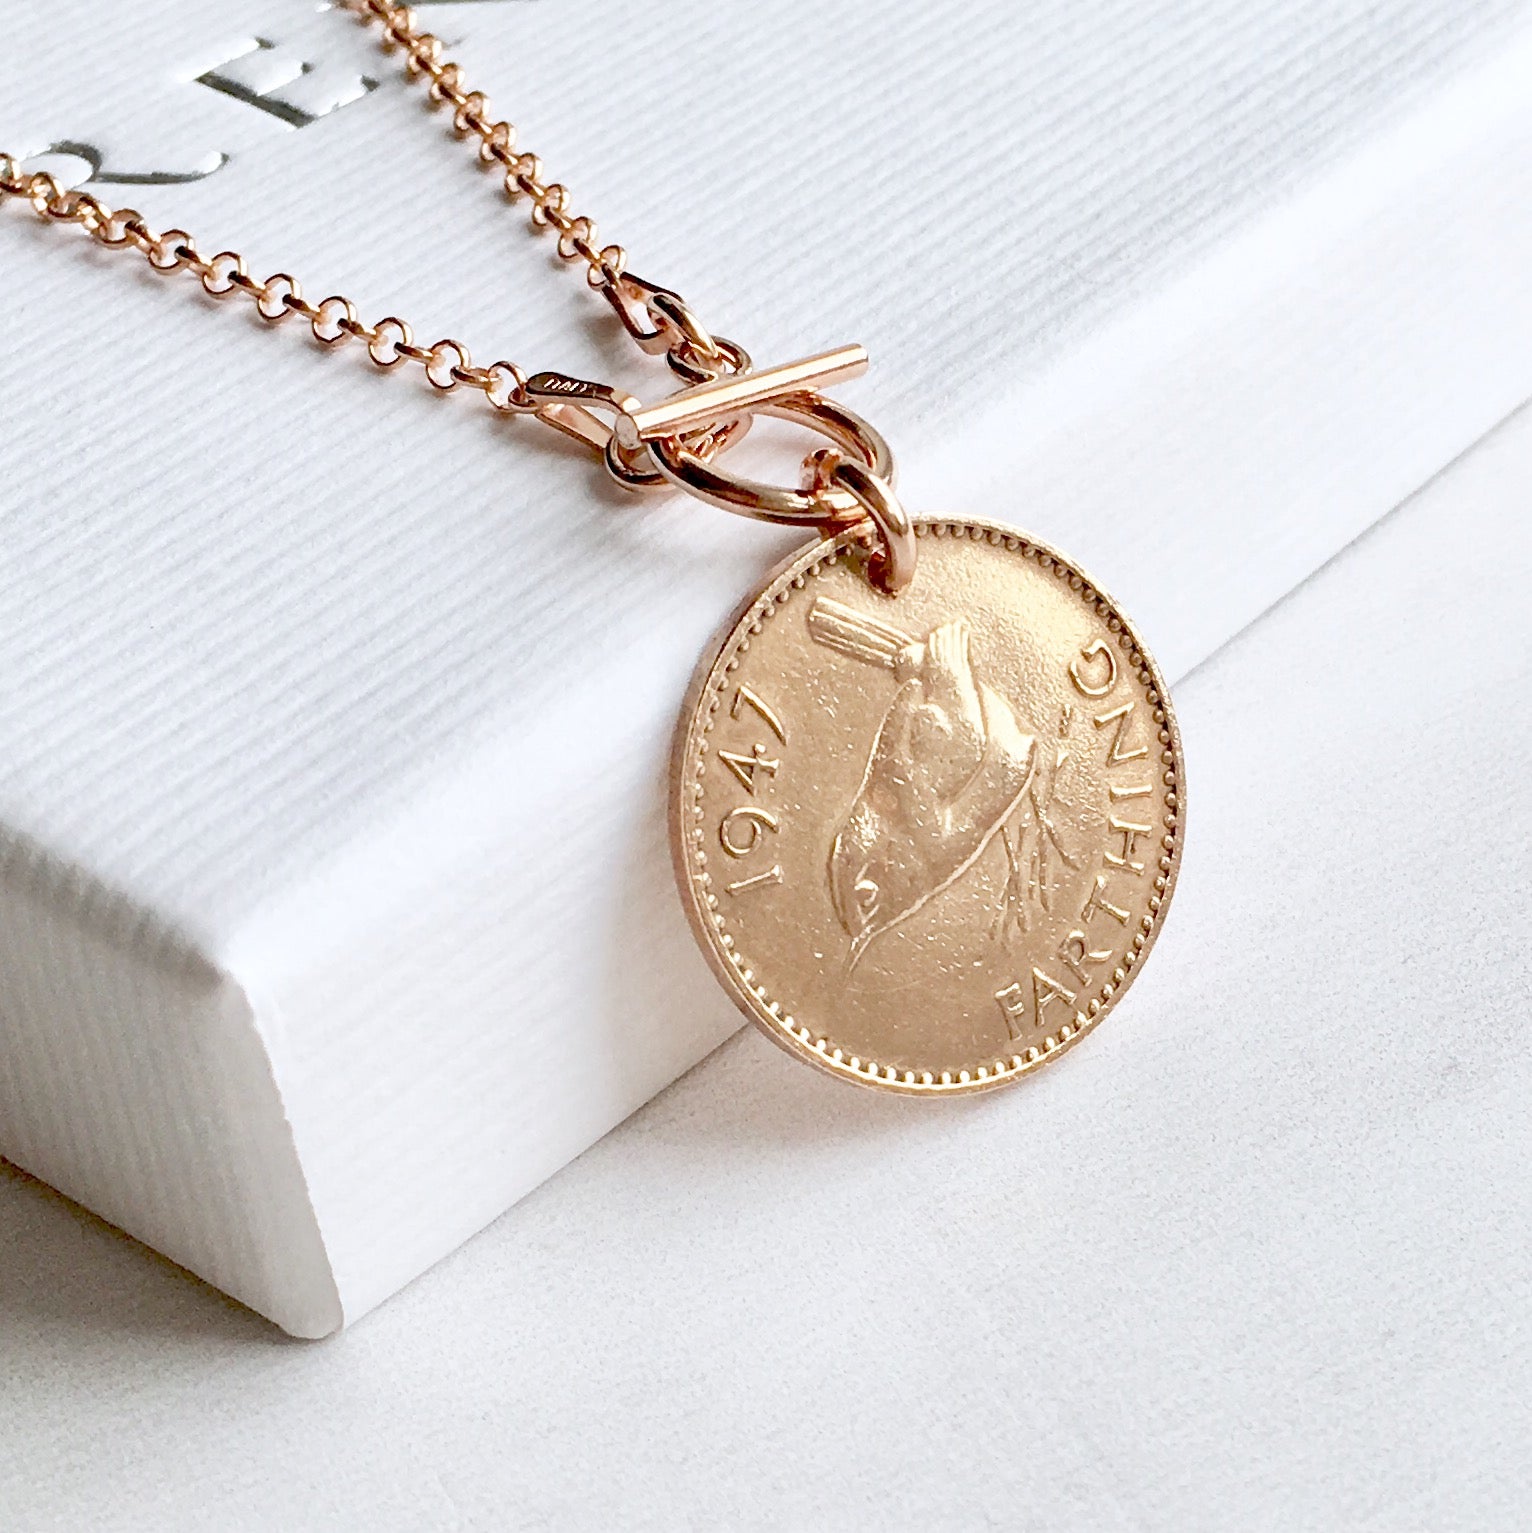 Farthing British coin necklace women's gift